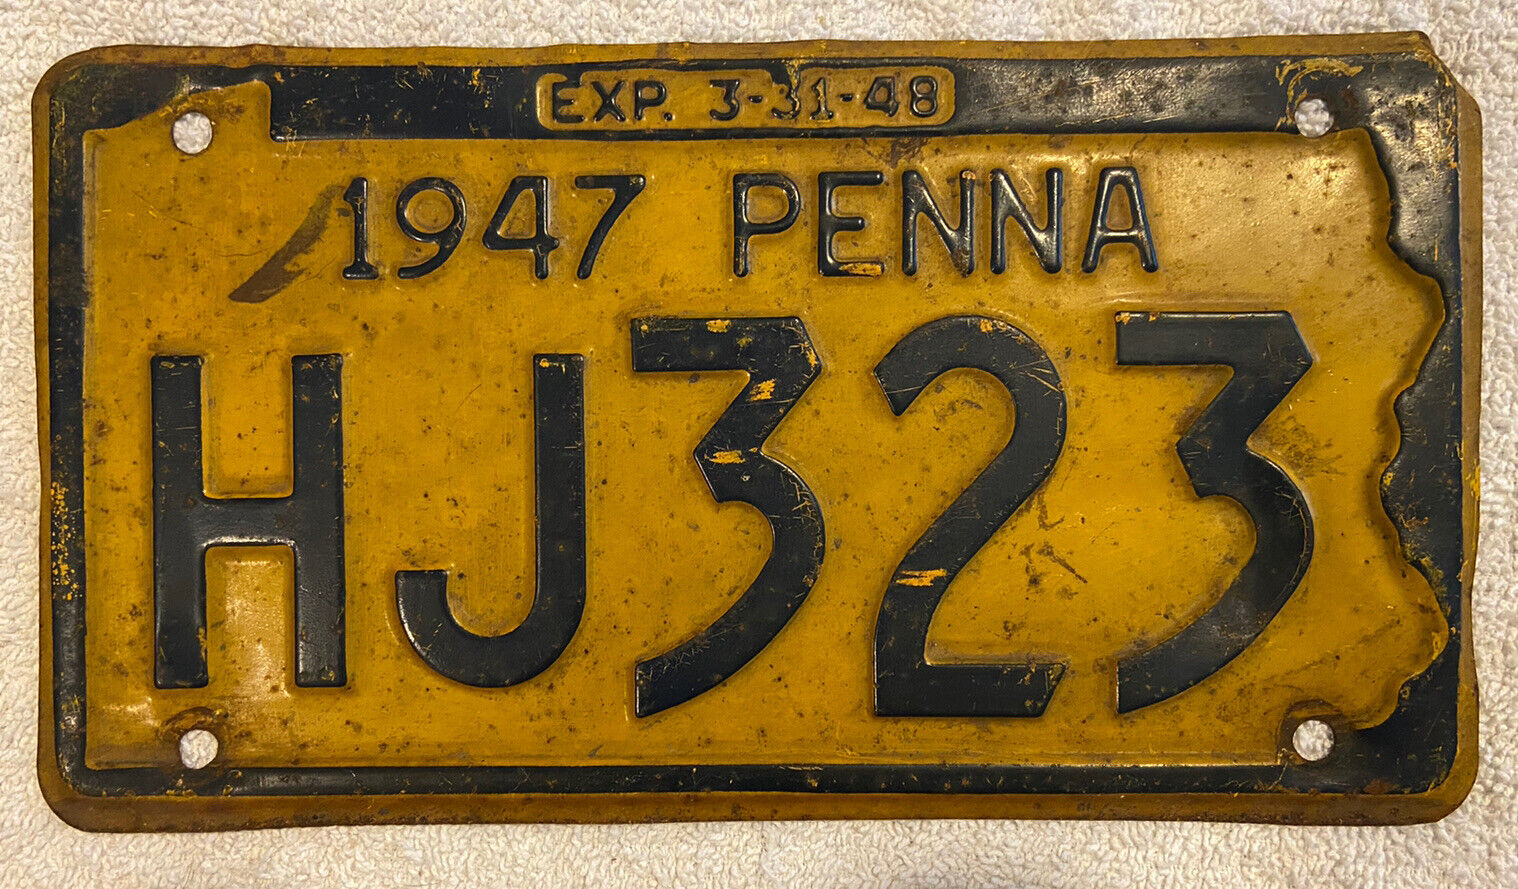 VINTAGE ORIGINAL 1947 PENNSYLVANIA LICENSE PLATE  See My Other Plates